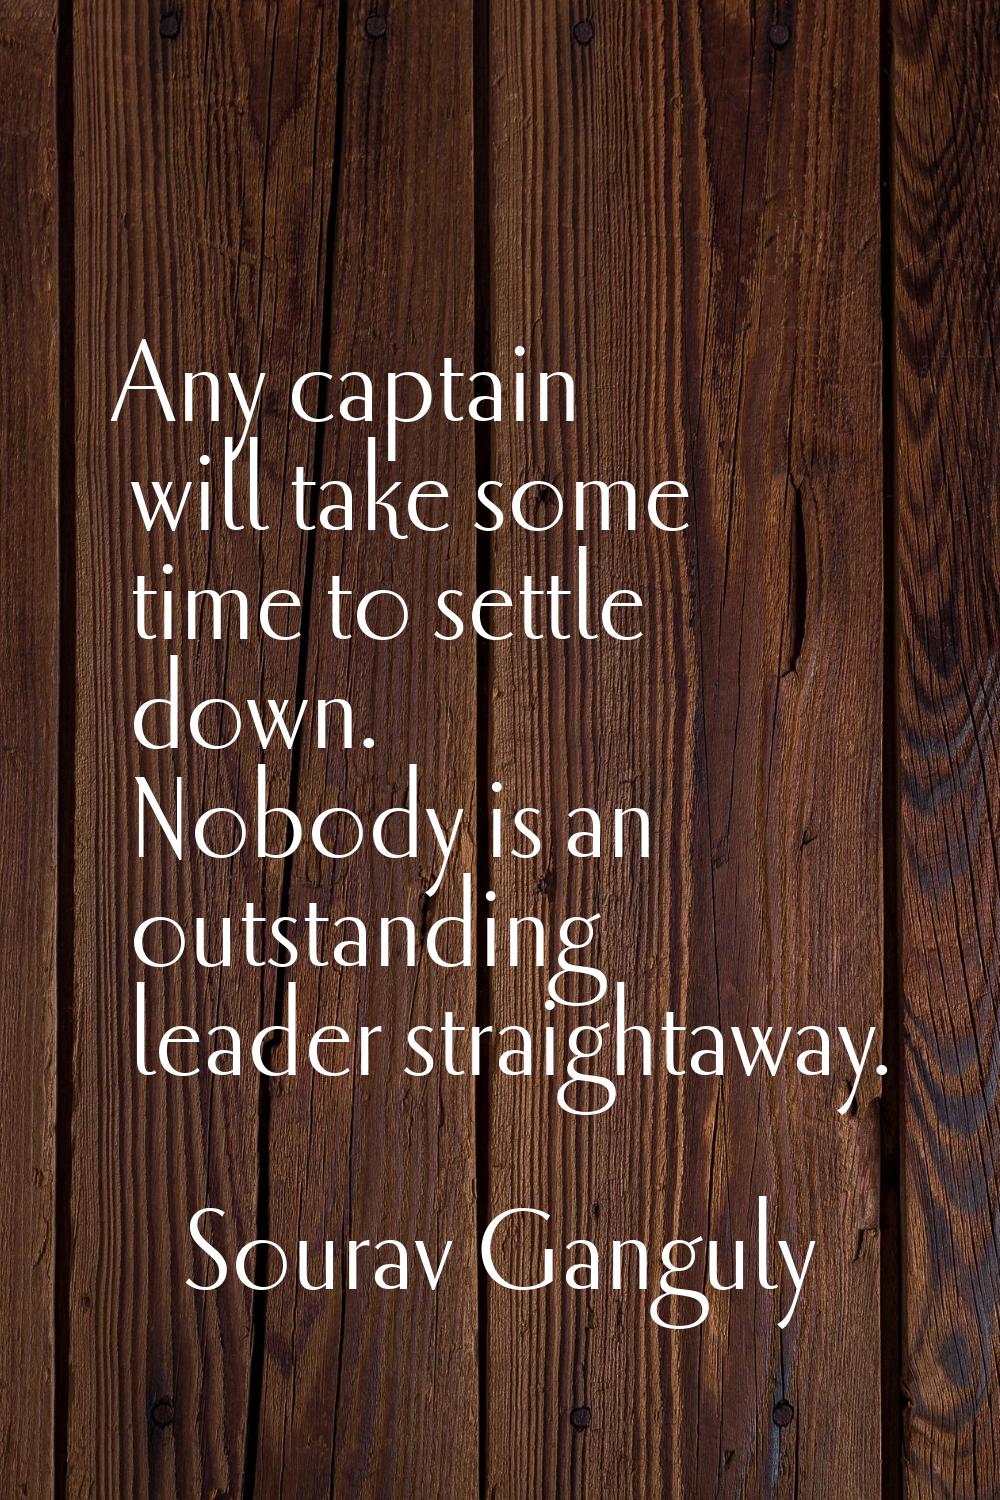 Any captain will take some time to settle down. Nobody is an outstanding leader straightaway.